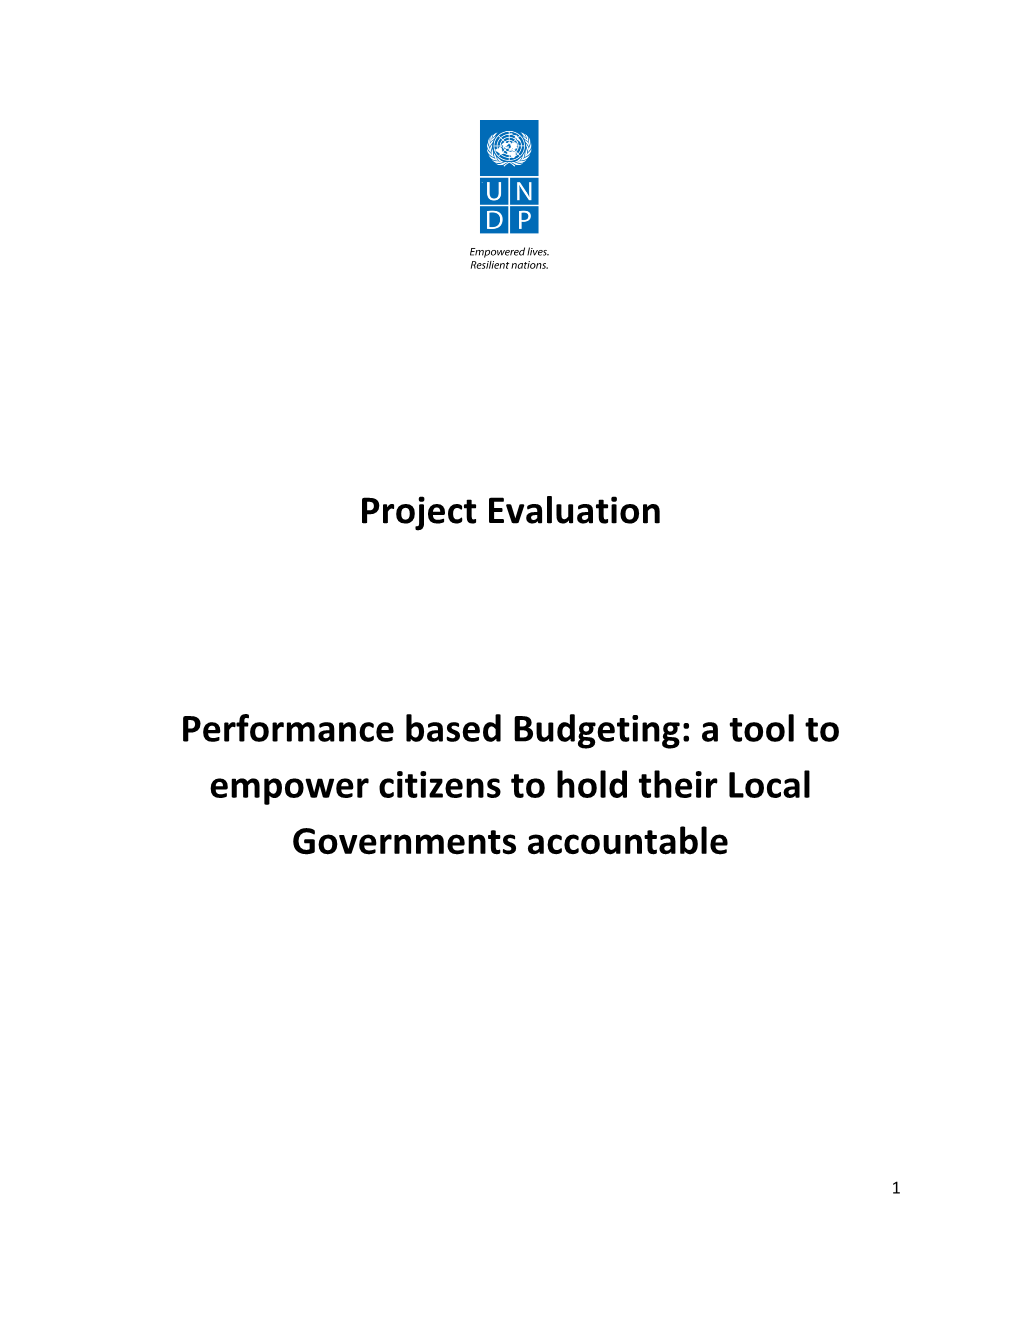 Project Evaluation Performance Based Budgeting: a Tool to Empower